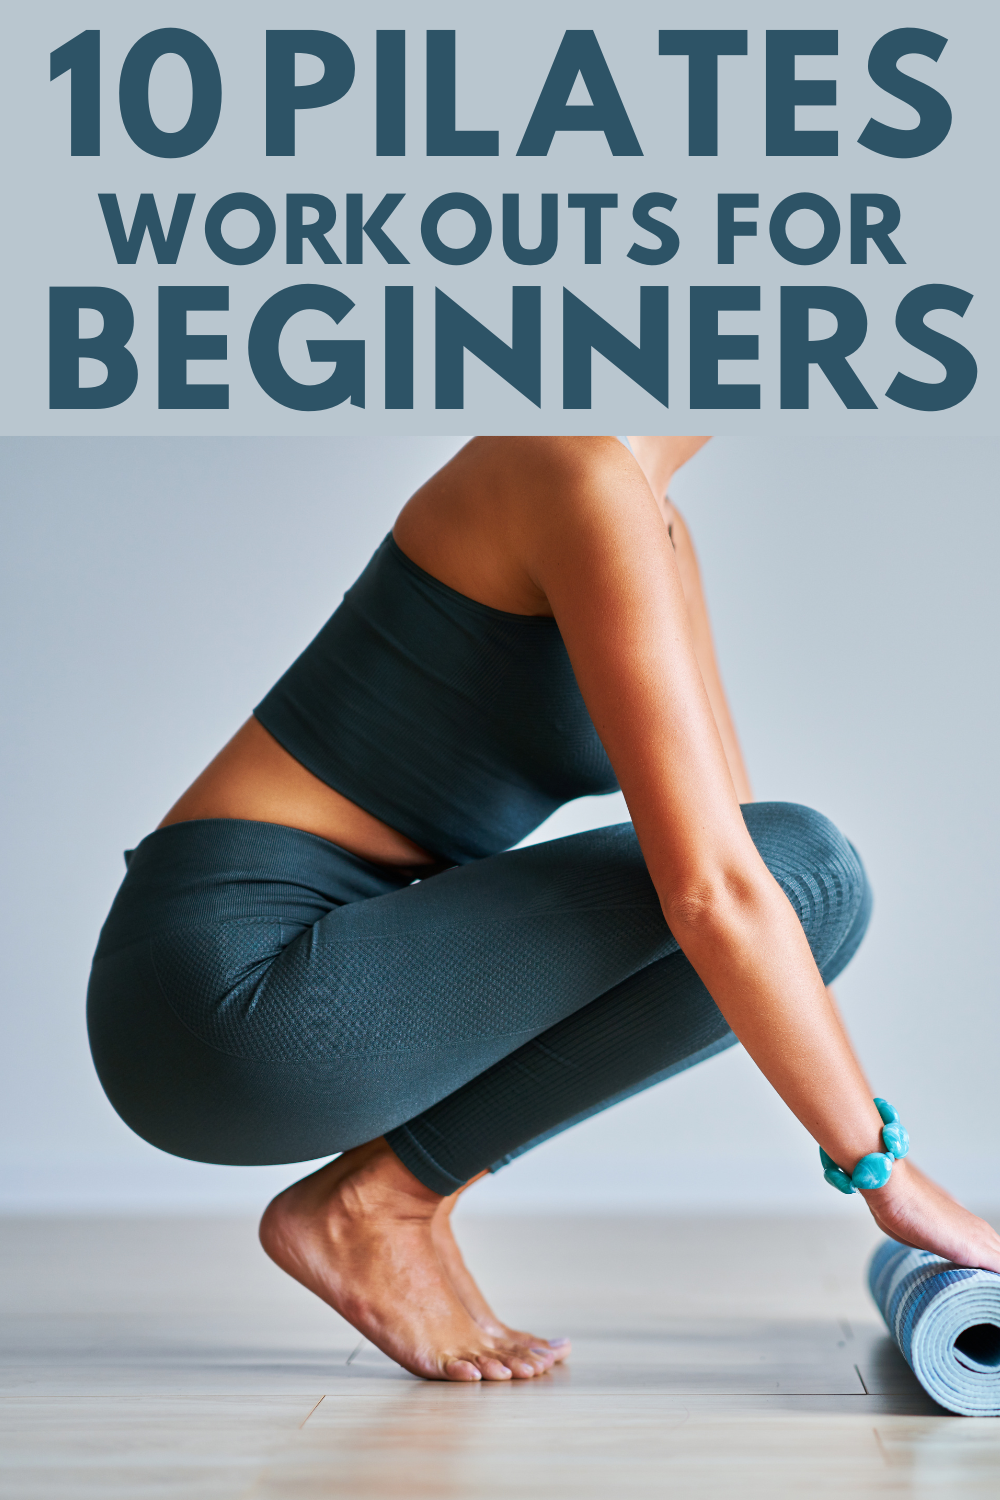 Pilates Made Easy: 10 Simple Workouts to Get Started with Pilates
